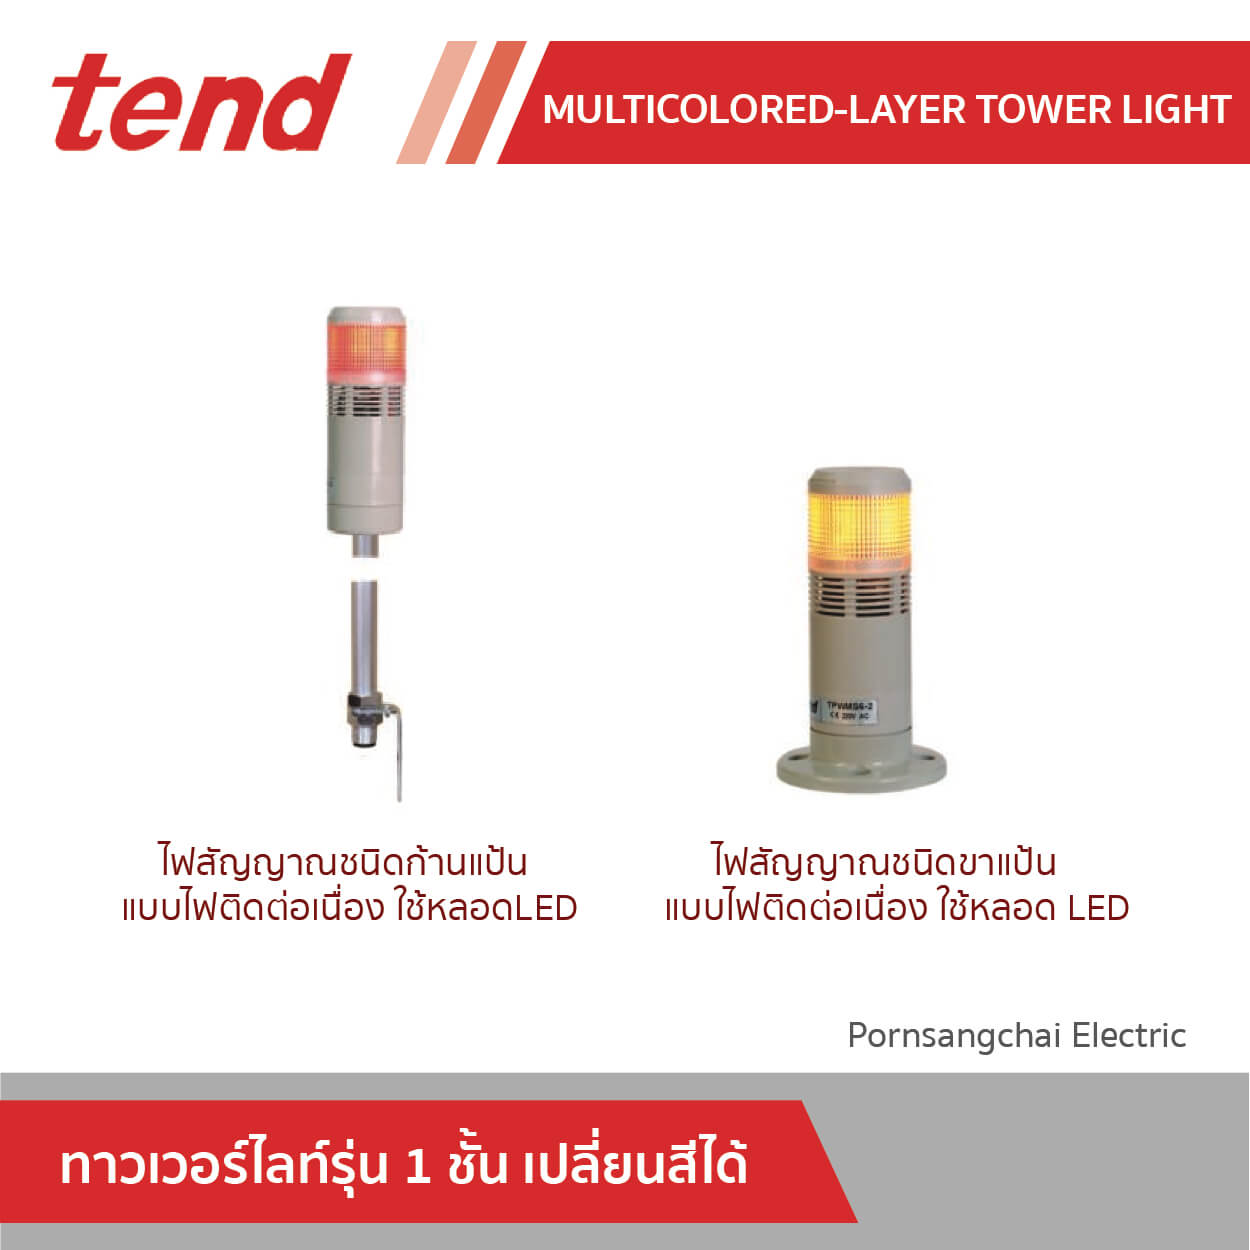 tend Multicolored-Layer Tower Light